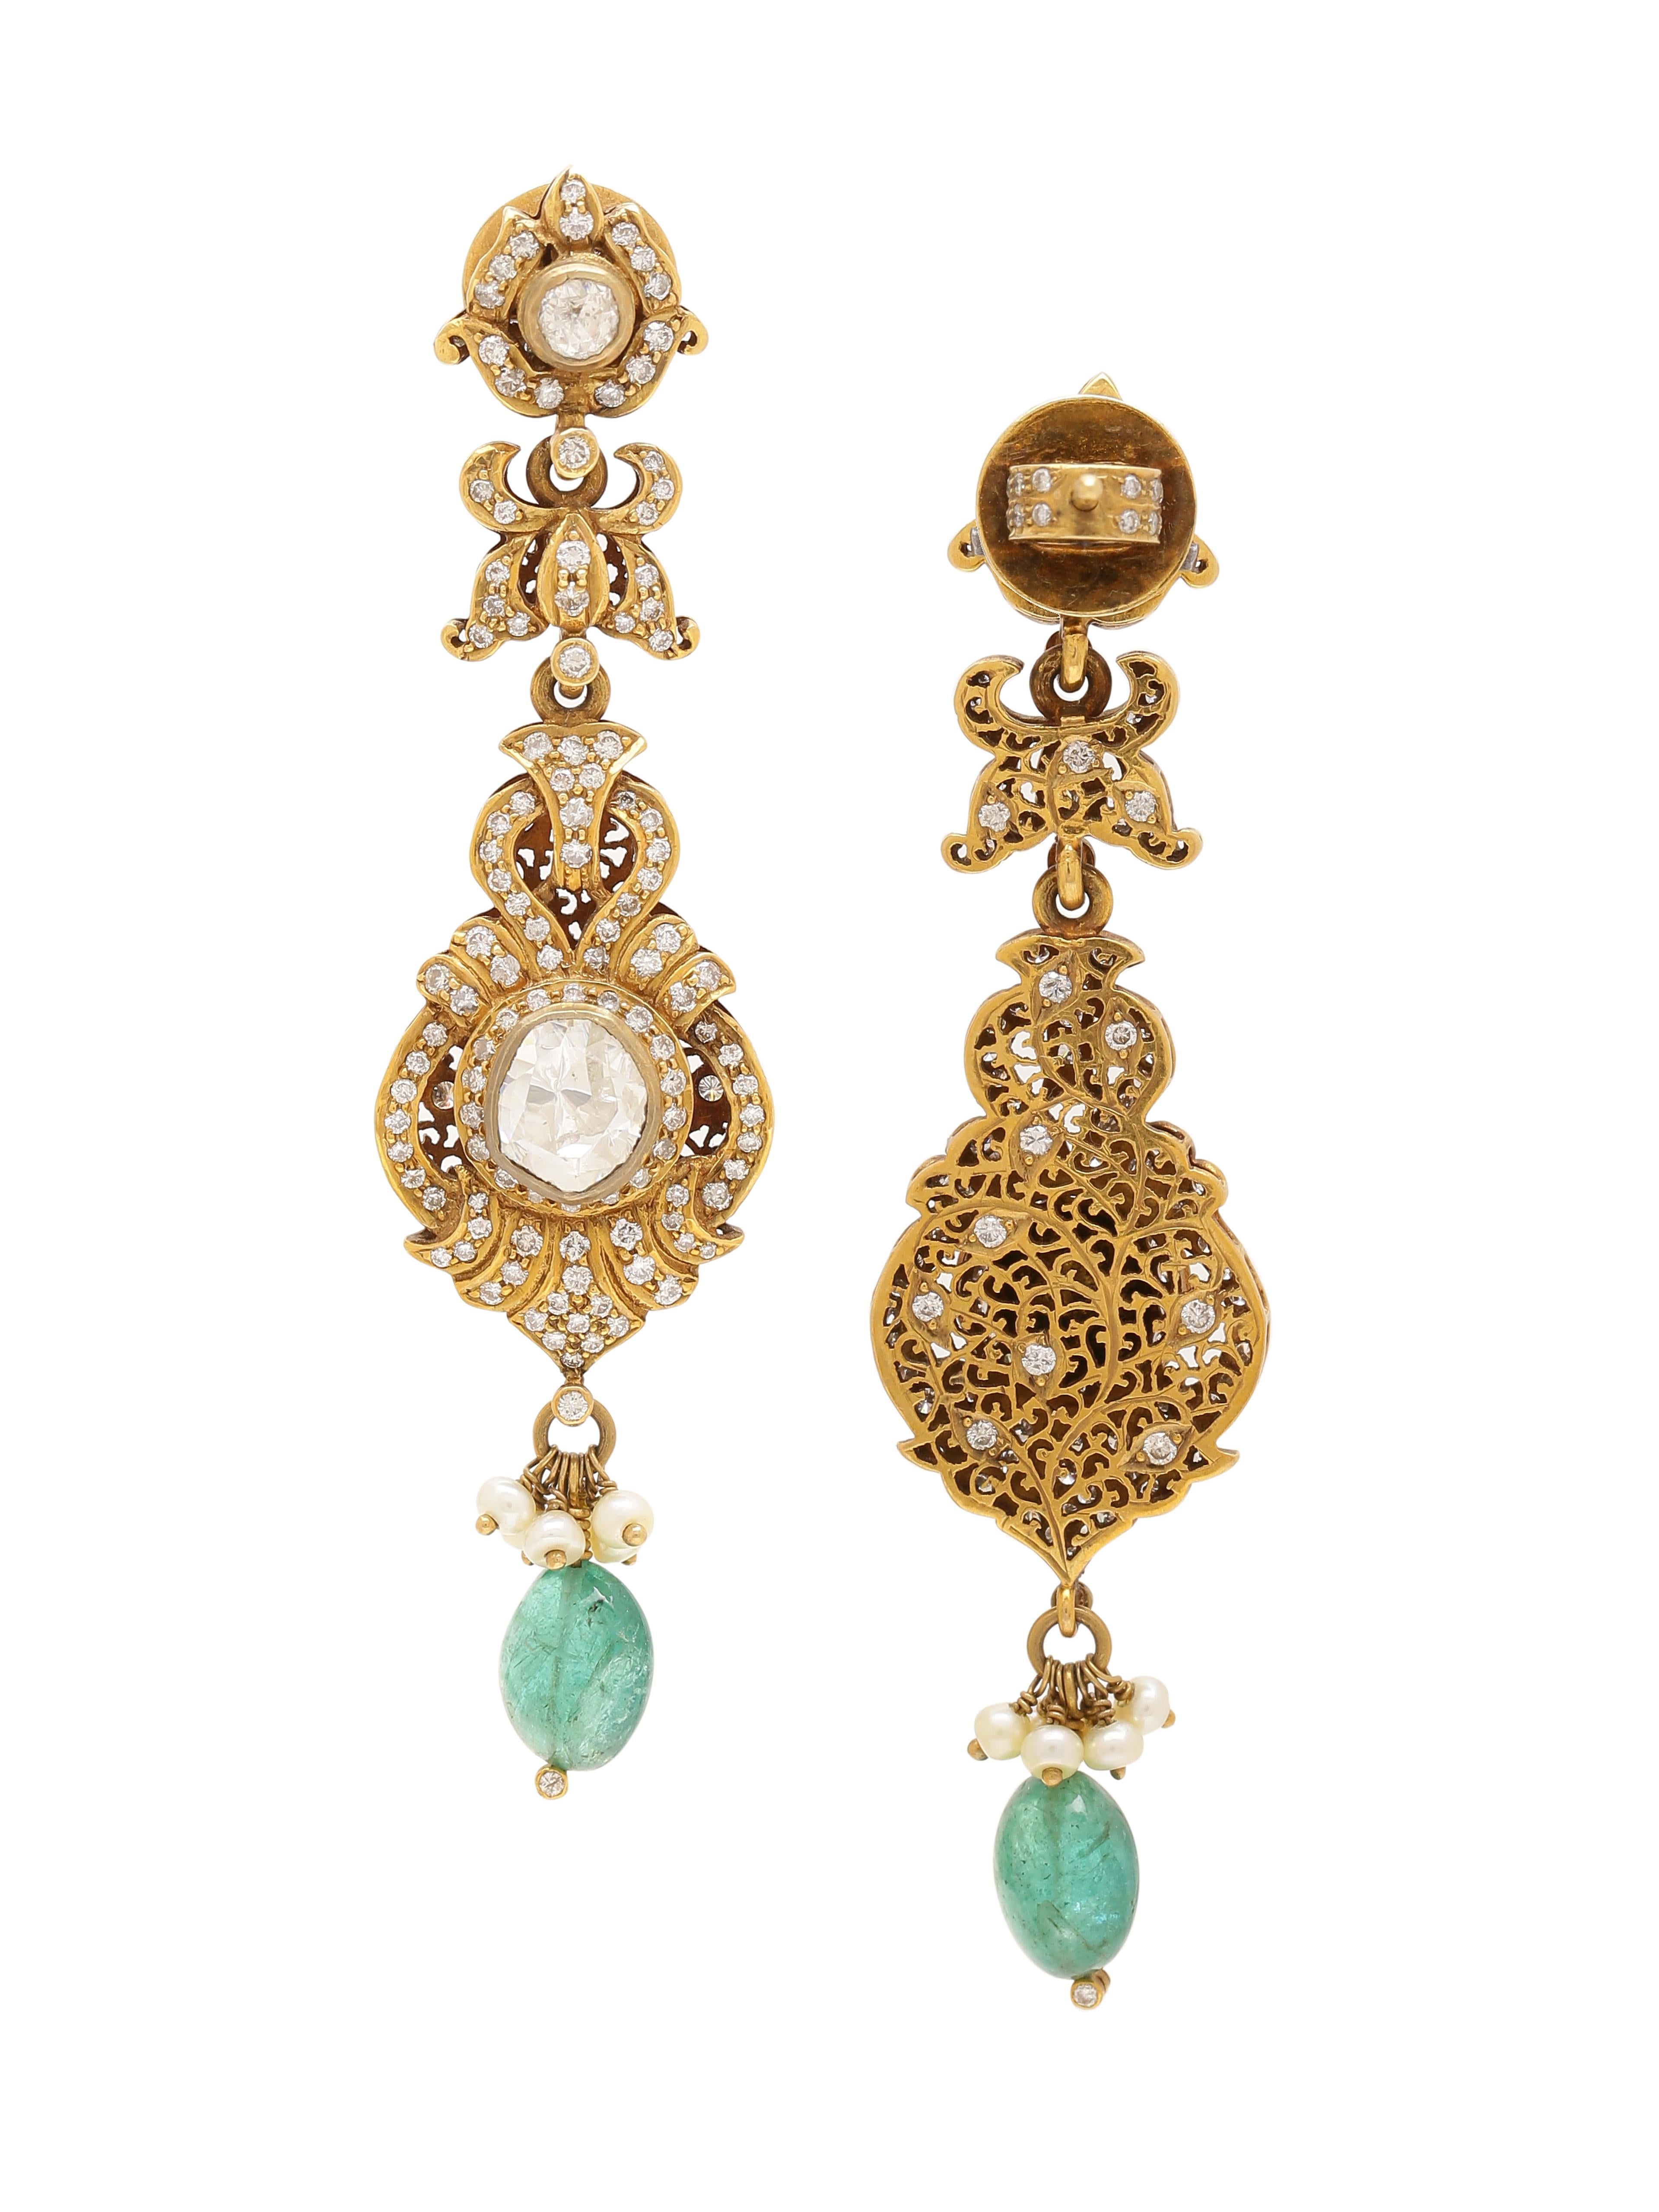 A pair of beautiful earring with Diamonds both Rose cut and Full Cut Rounds and a Pair of Emerald Bead hanging at the bottom.
The earring has nice high dome Rosecut diamonds on top and in centre. The Diamonds around are carefully set by hand and the